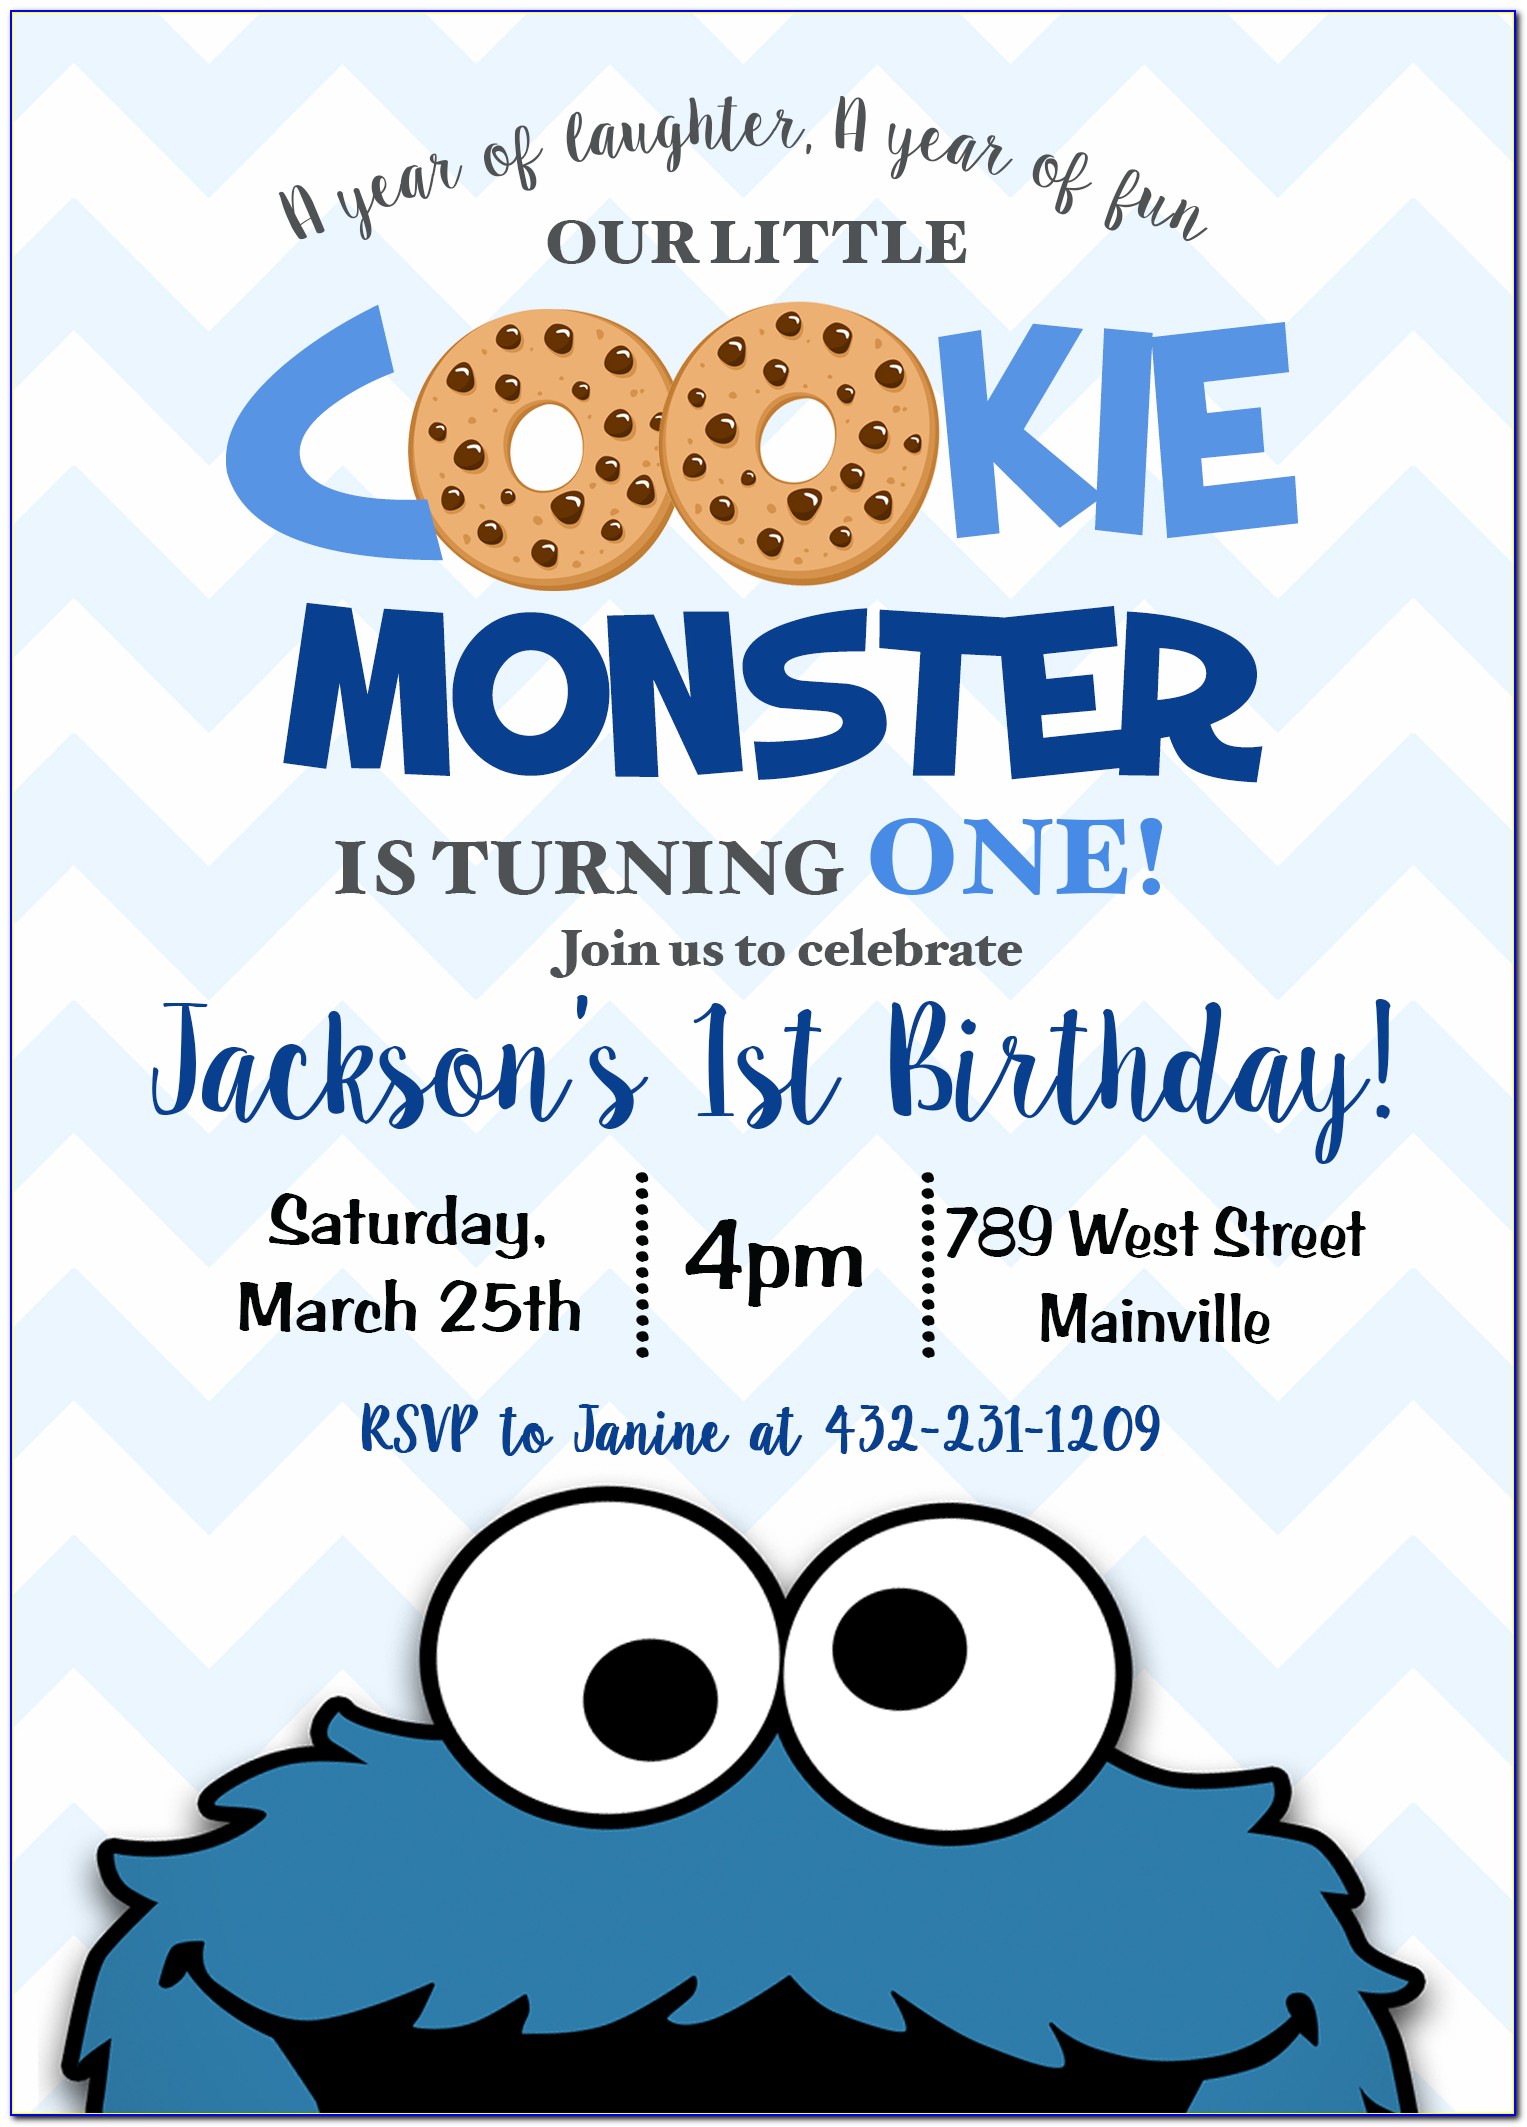 Cookie Monster Invitation Free Download